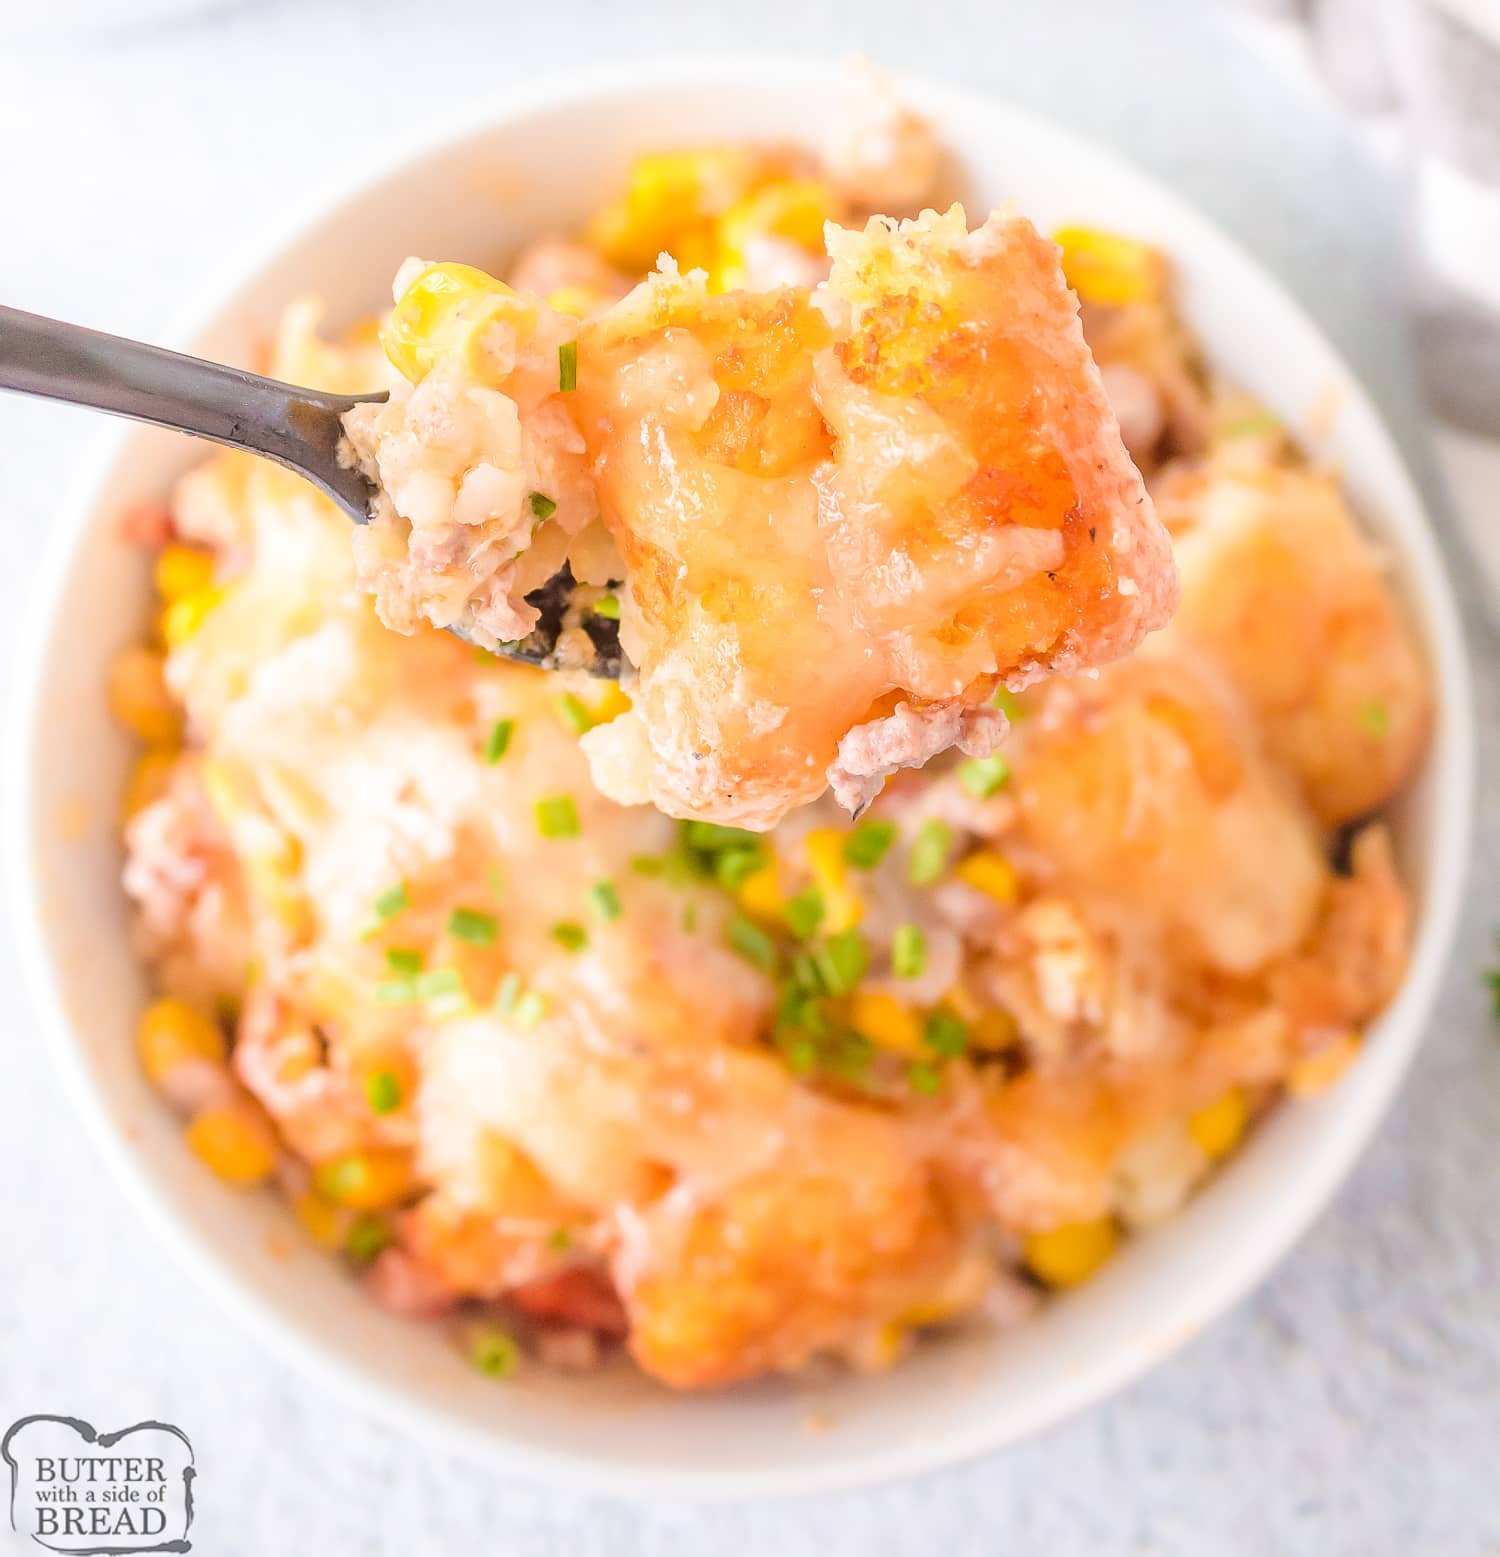 forkful of tater tot casserole with southwest flavors